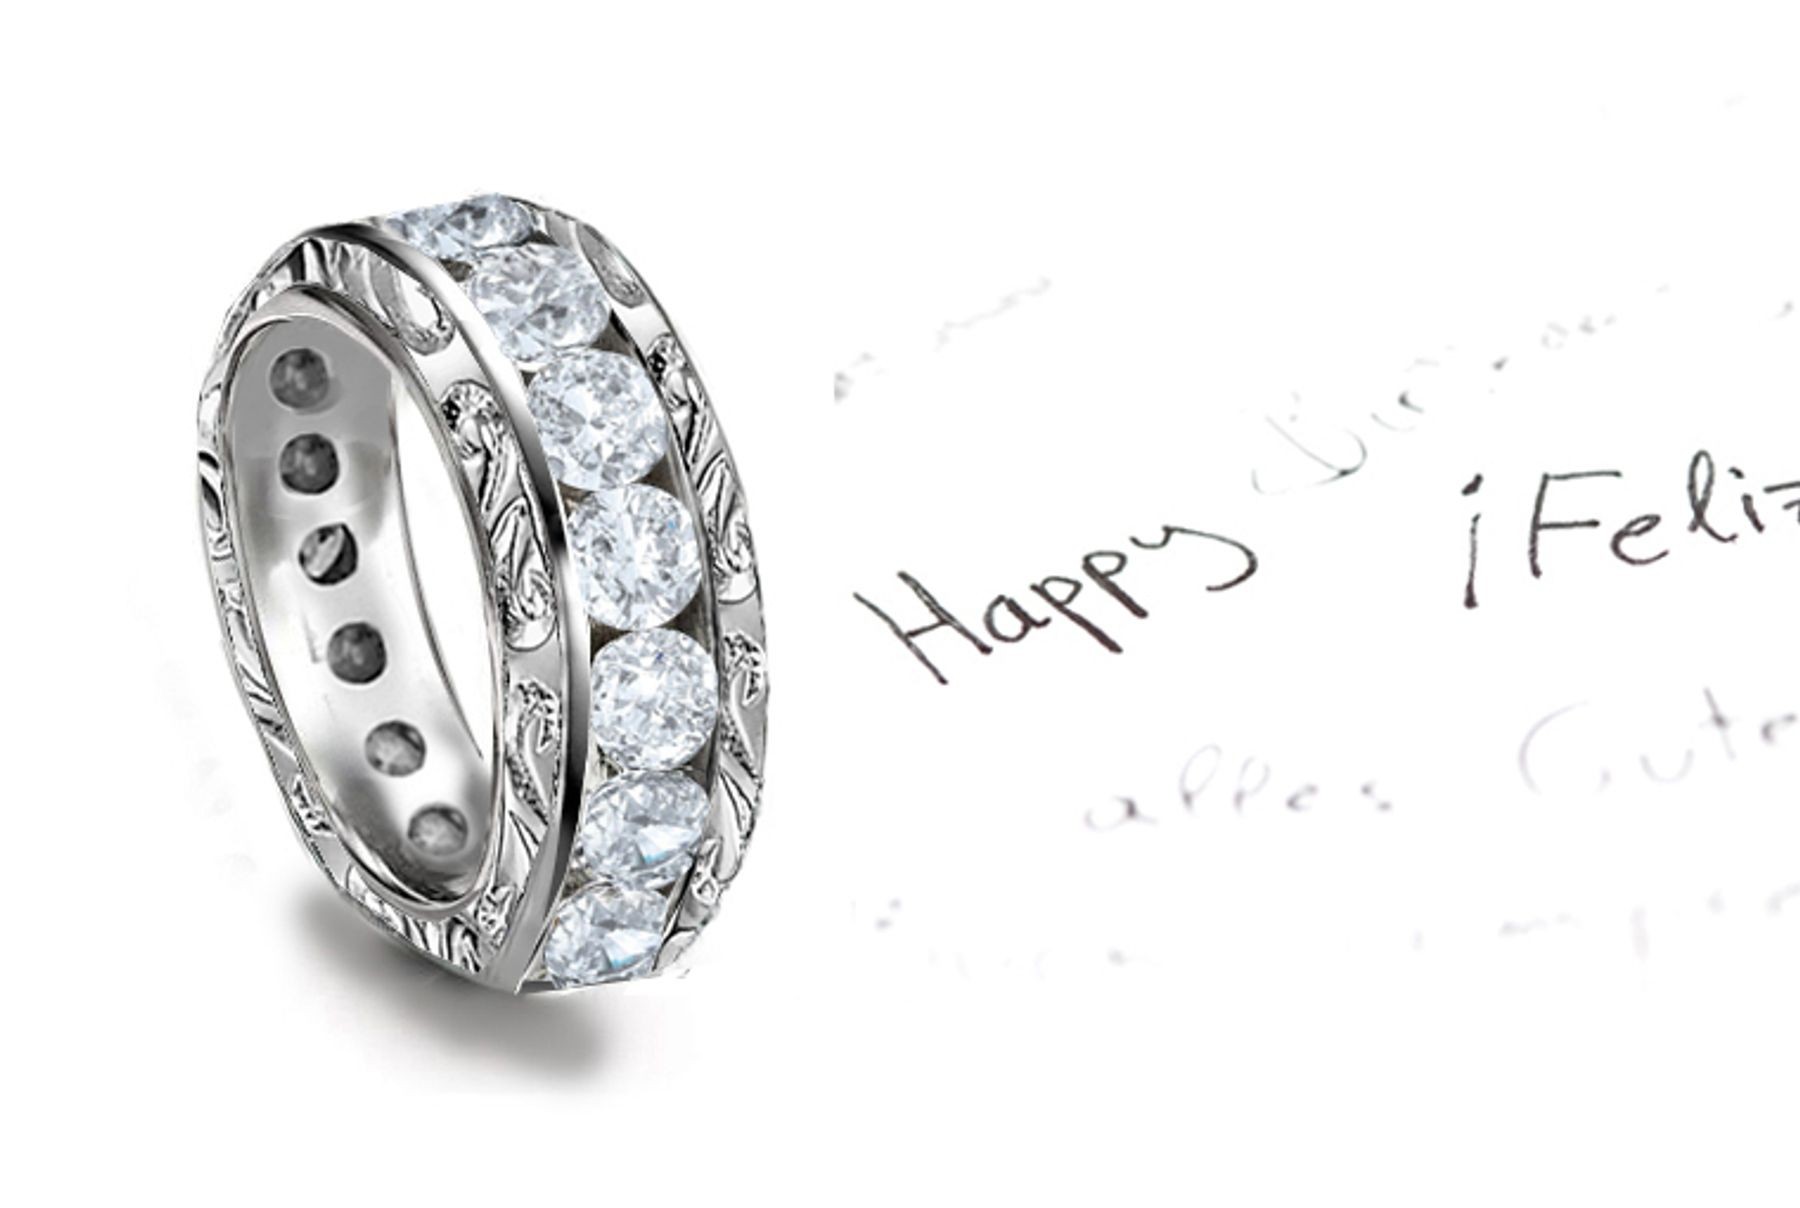 Finest & Choicest: Designer Diamond Band Engraved with Various Designs, Motifs & Crests 2 to 4 carats Size 6